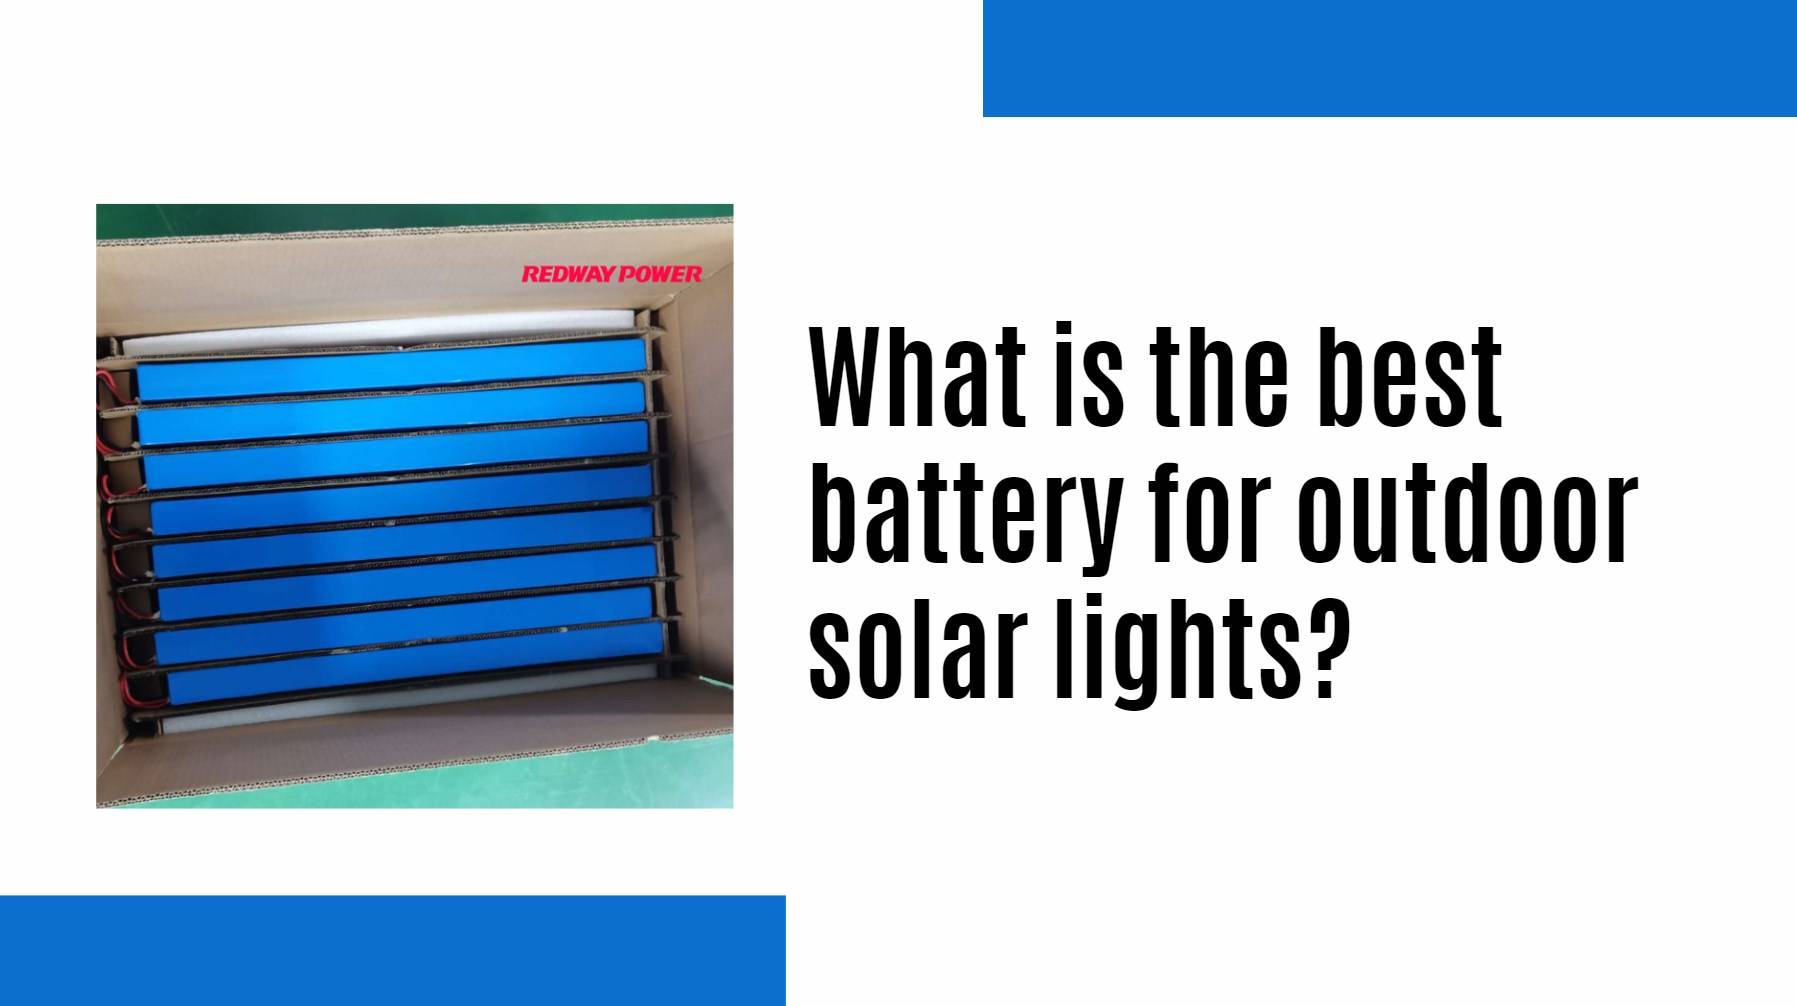 solar street light factory manufacturer oem. What is the best battery for outdoor solar lights? redway power